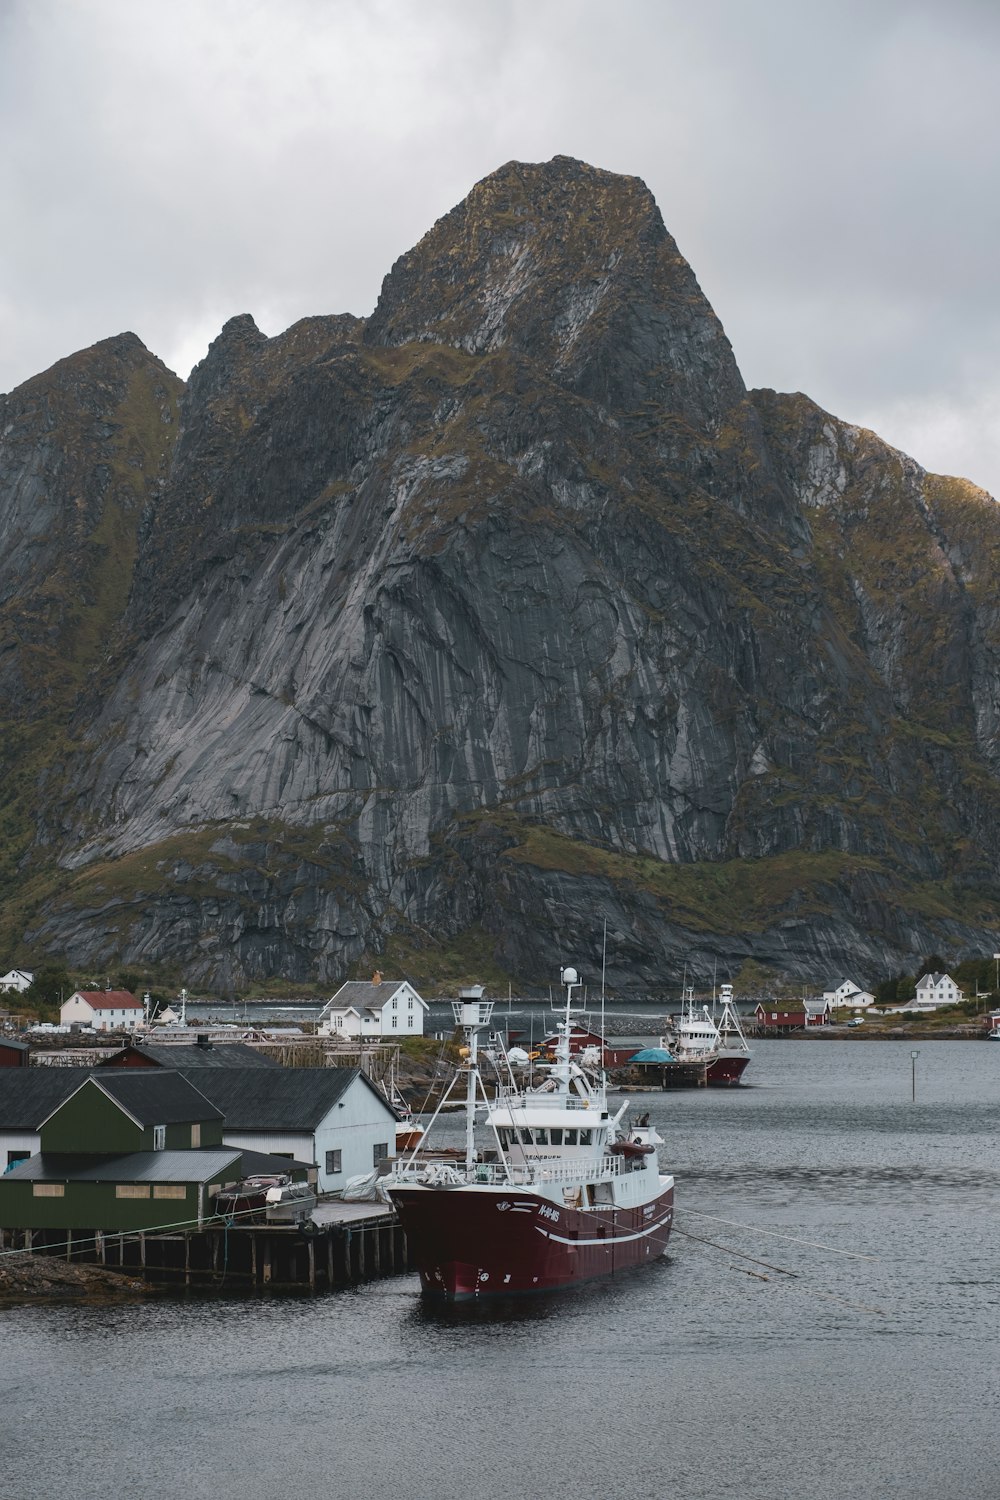 a boat docked in a harbor with a mountain in the background